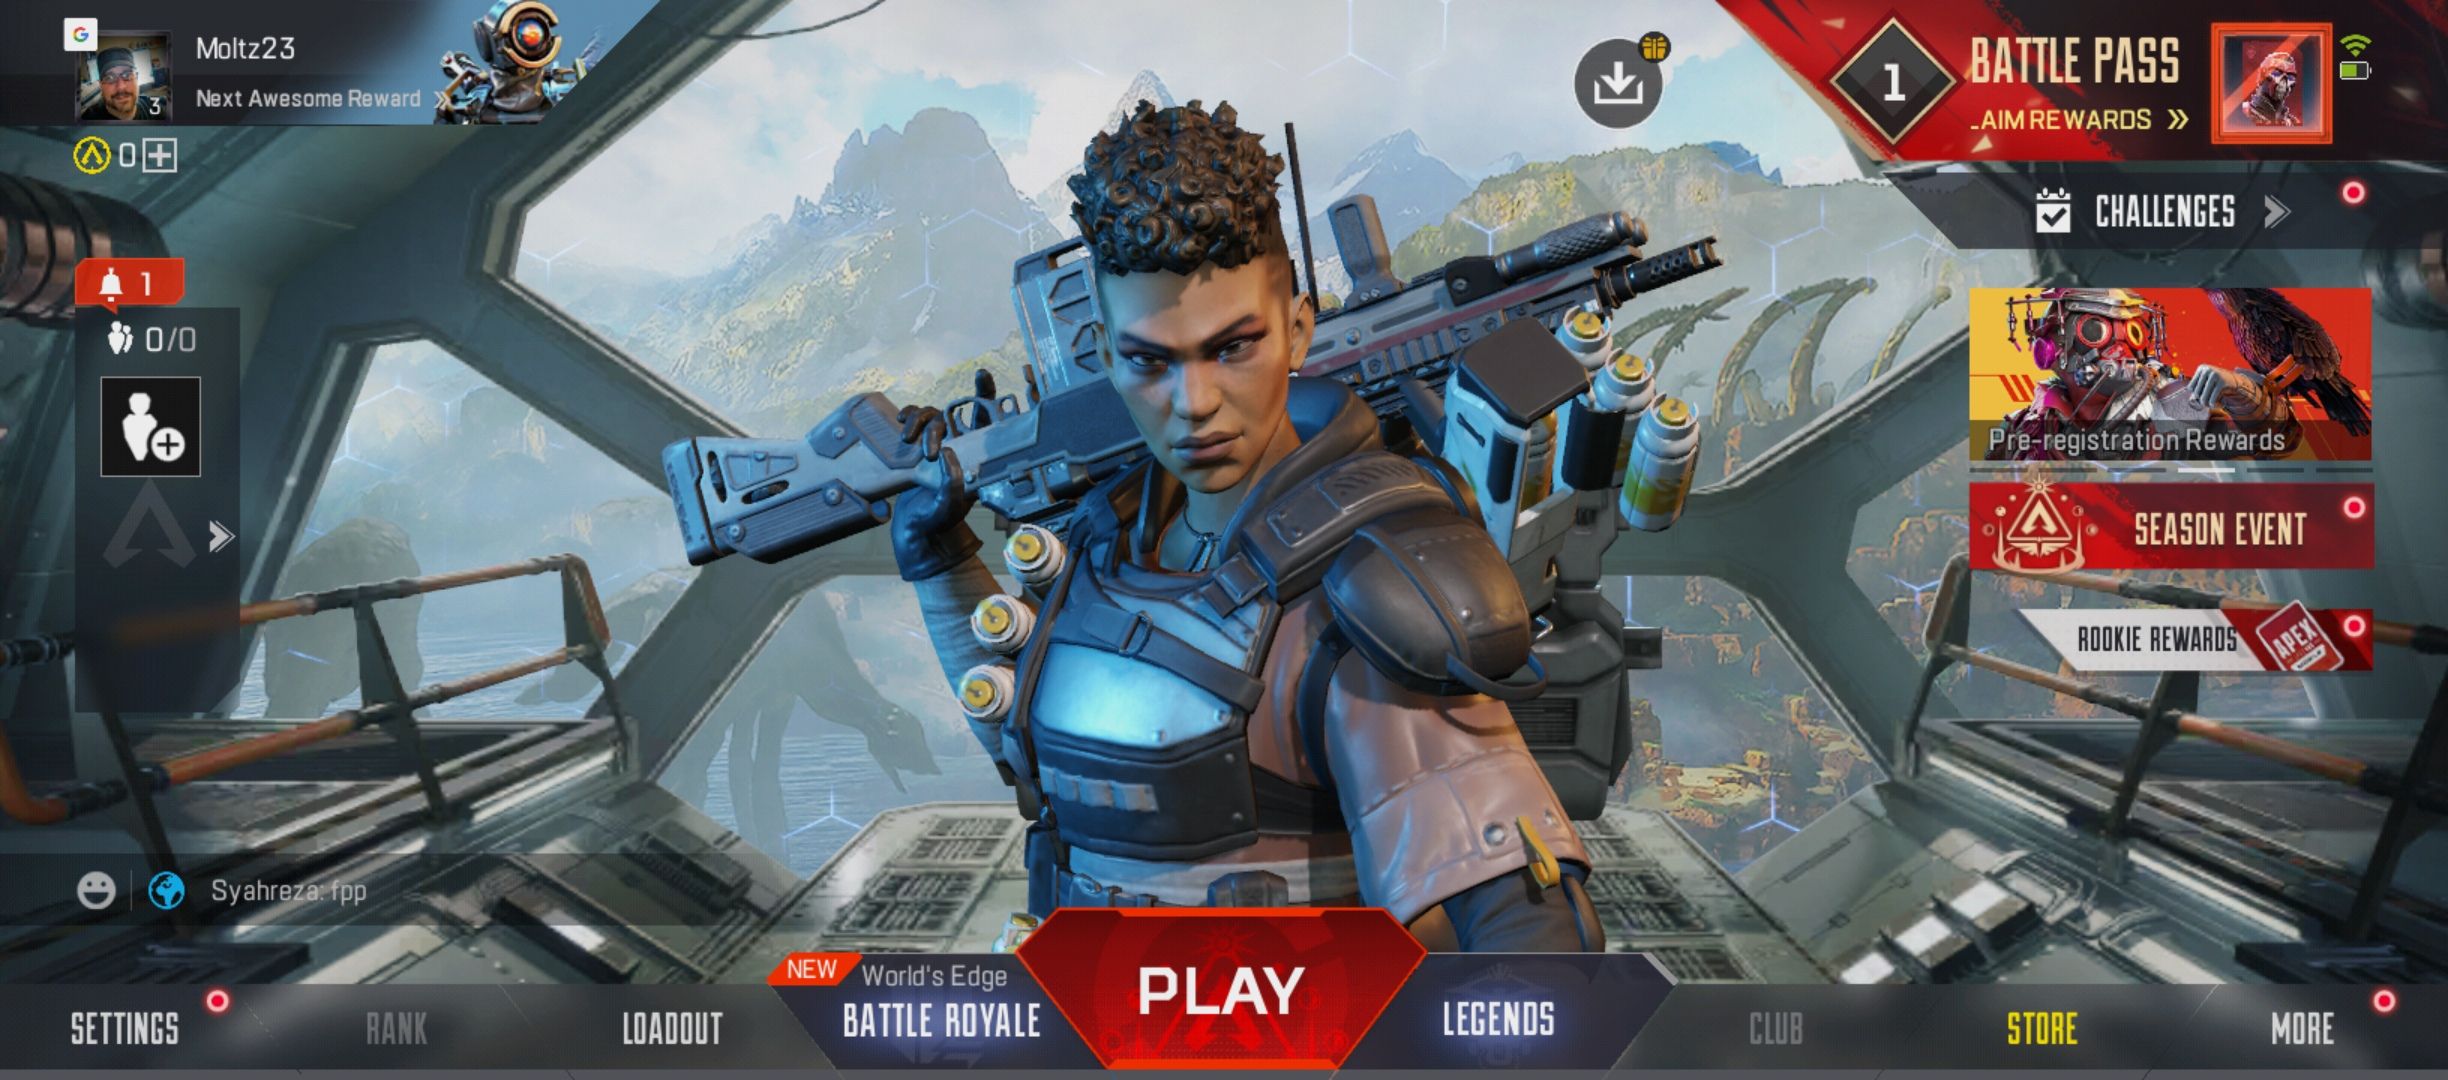 APEX LEGENDS MOBILE IS BACK!! (NEW GAMEPLAY RELEASE